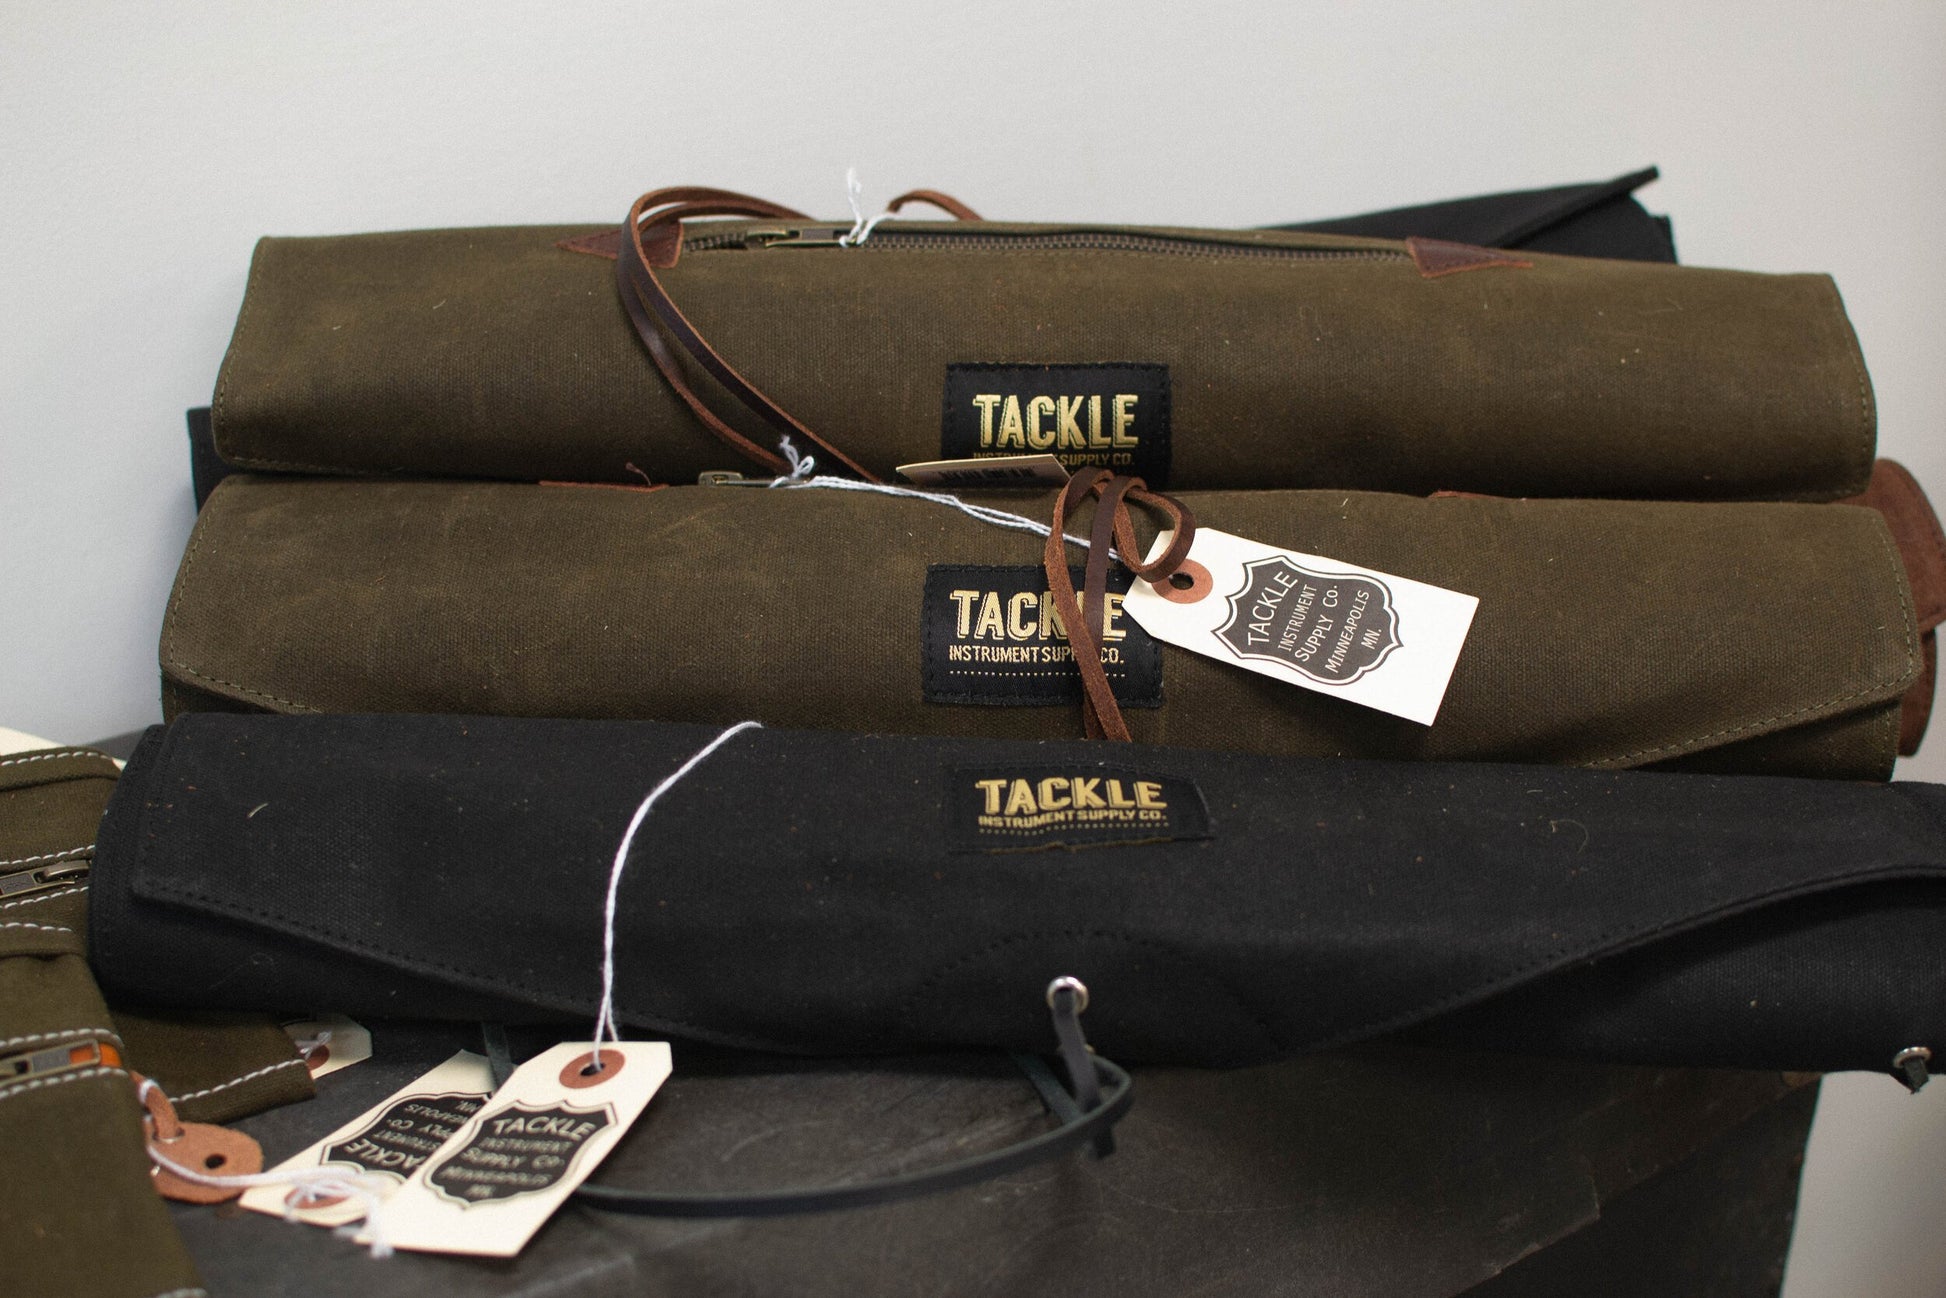 Tackle Instrument Supply Co. Waxed Canvas Roll Up Stick Bag